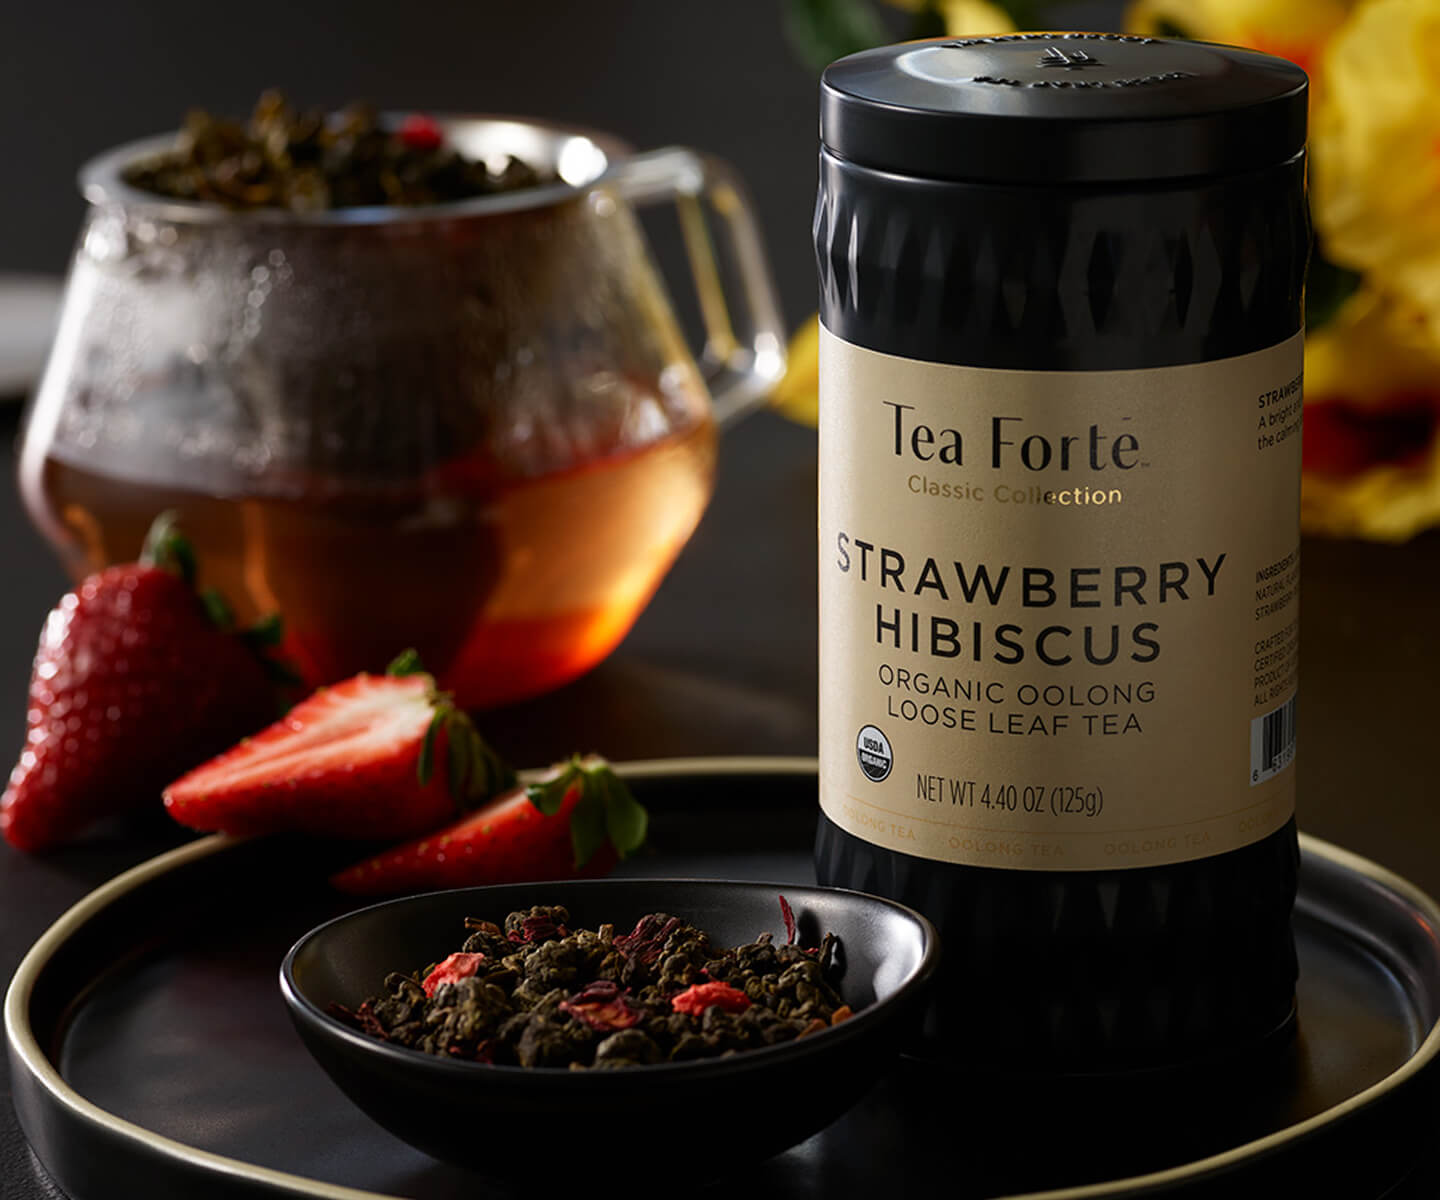 Loose leaf tea canister of Strawberry Hibiscus tea with strawberries and loose leaf tea in a bowl